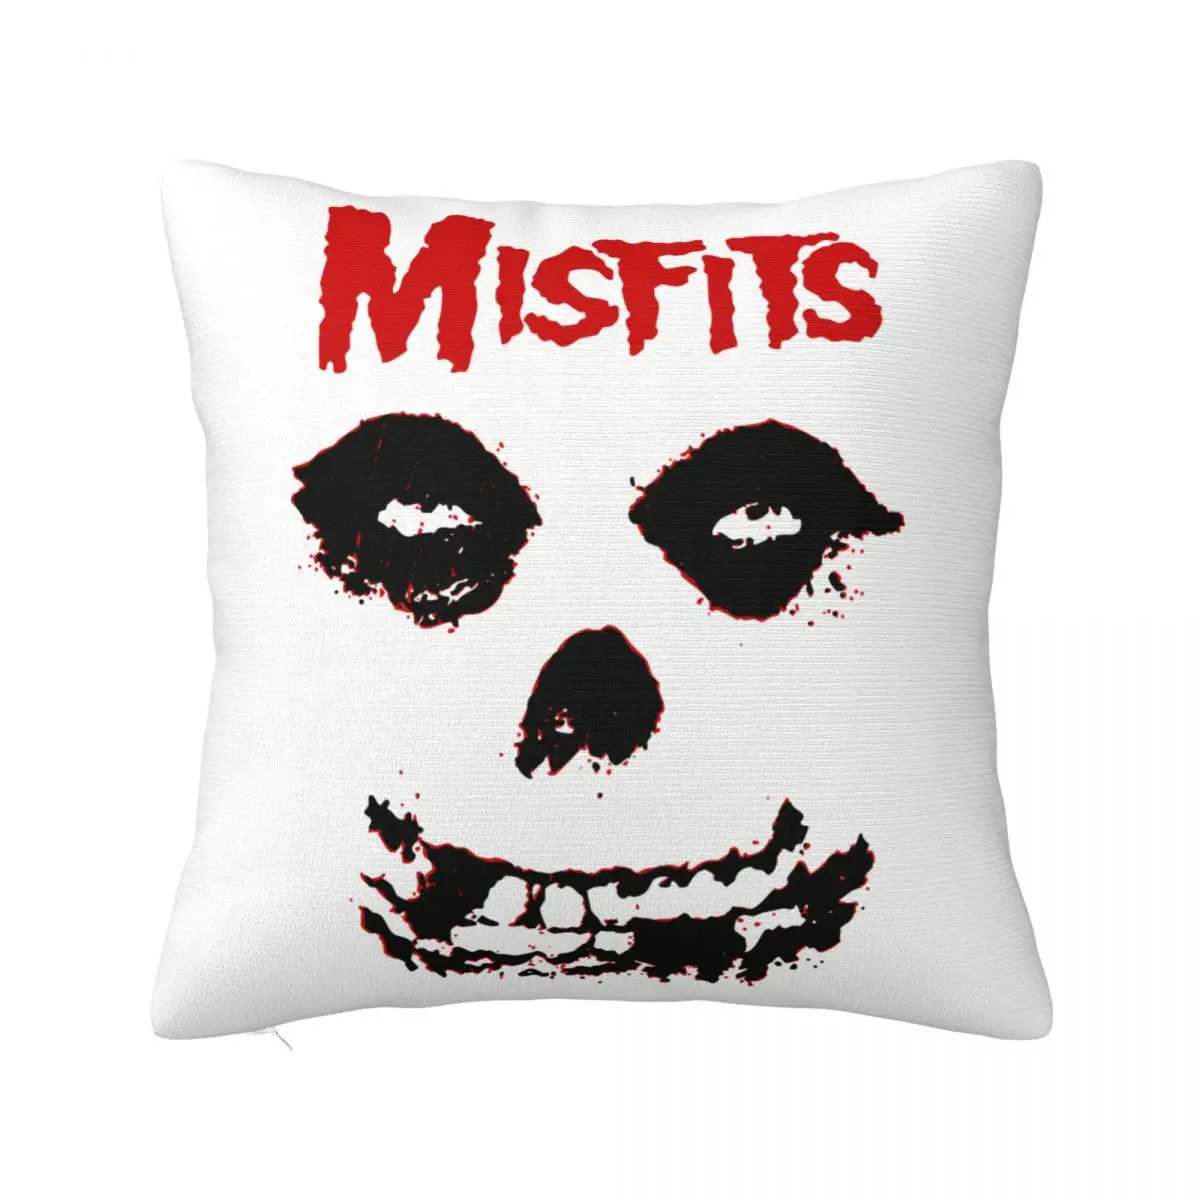 

Misfits Skull Pillowcase Printing Polyester Cushion Cover Gift Throw Pillow Case Cover Home Wholesale 45X45cm